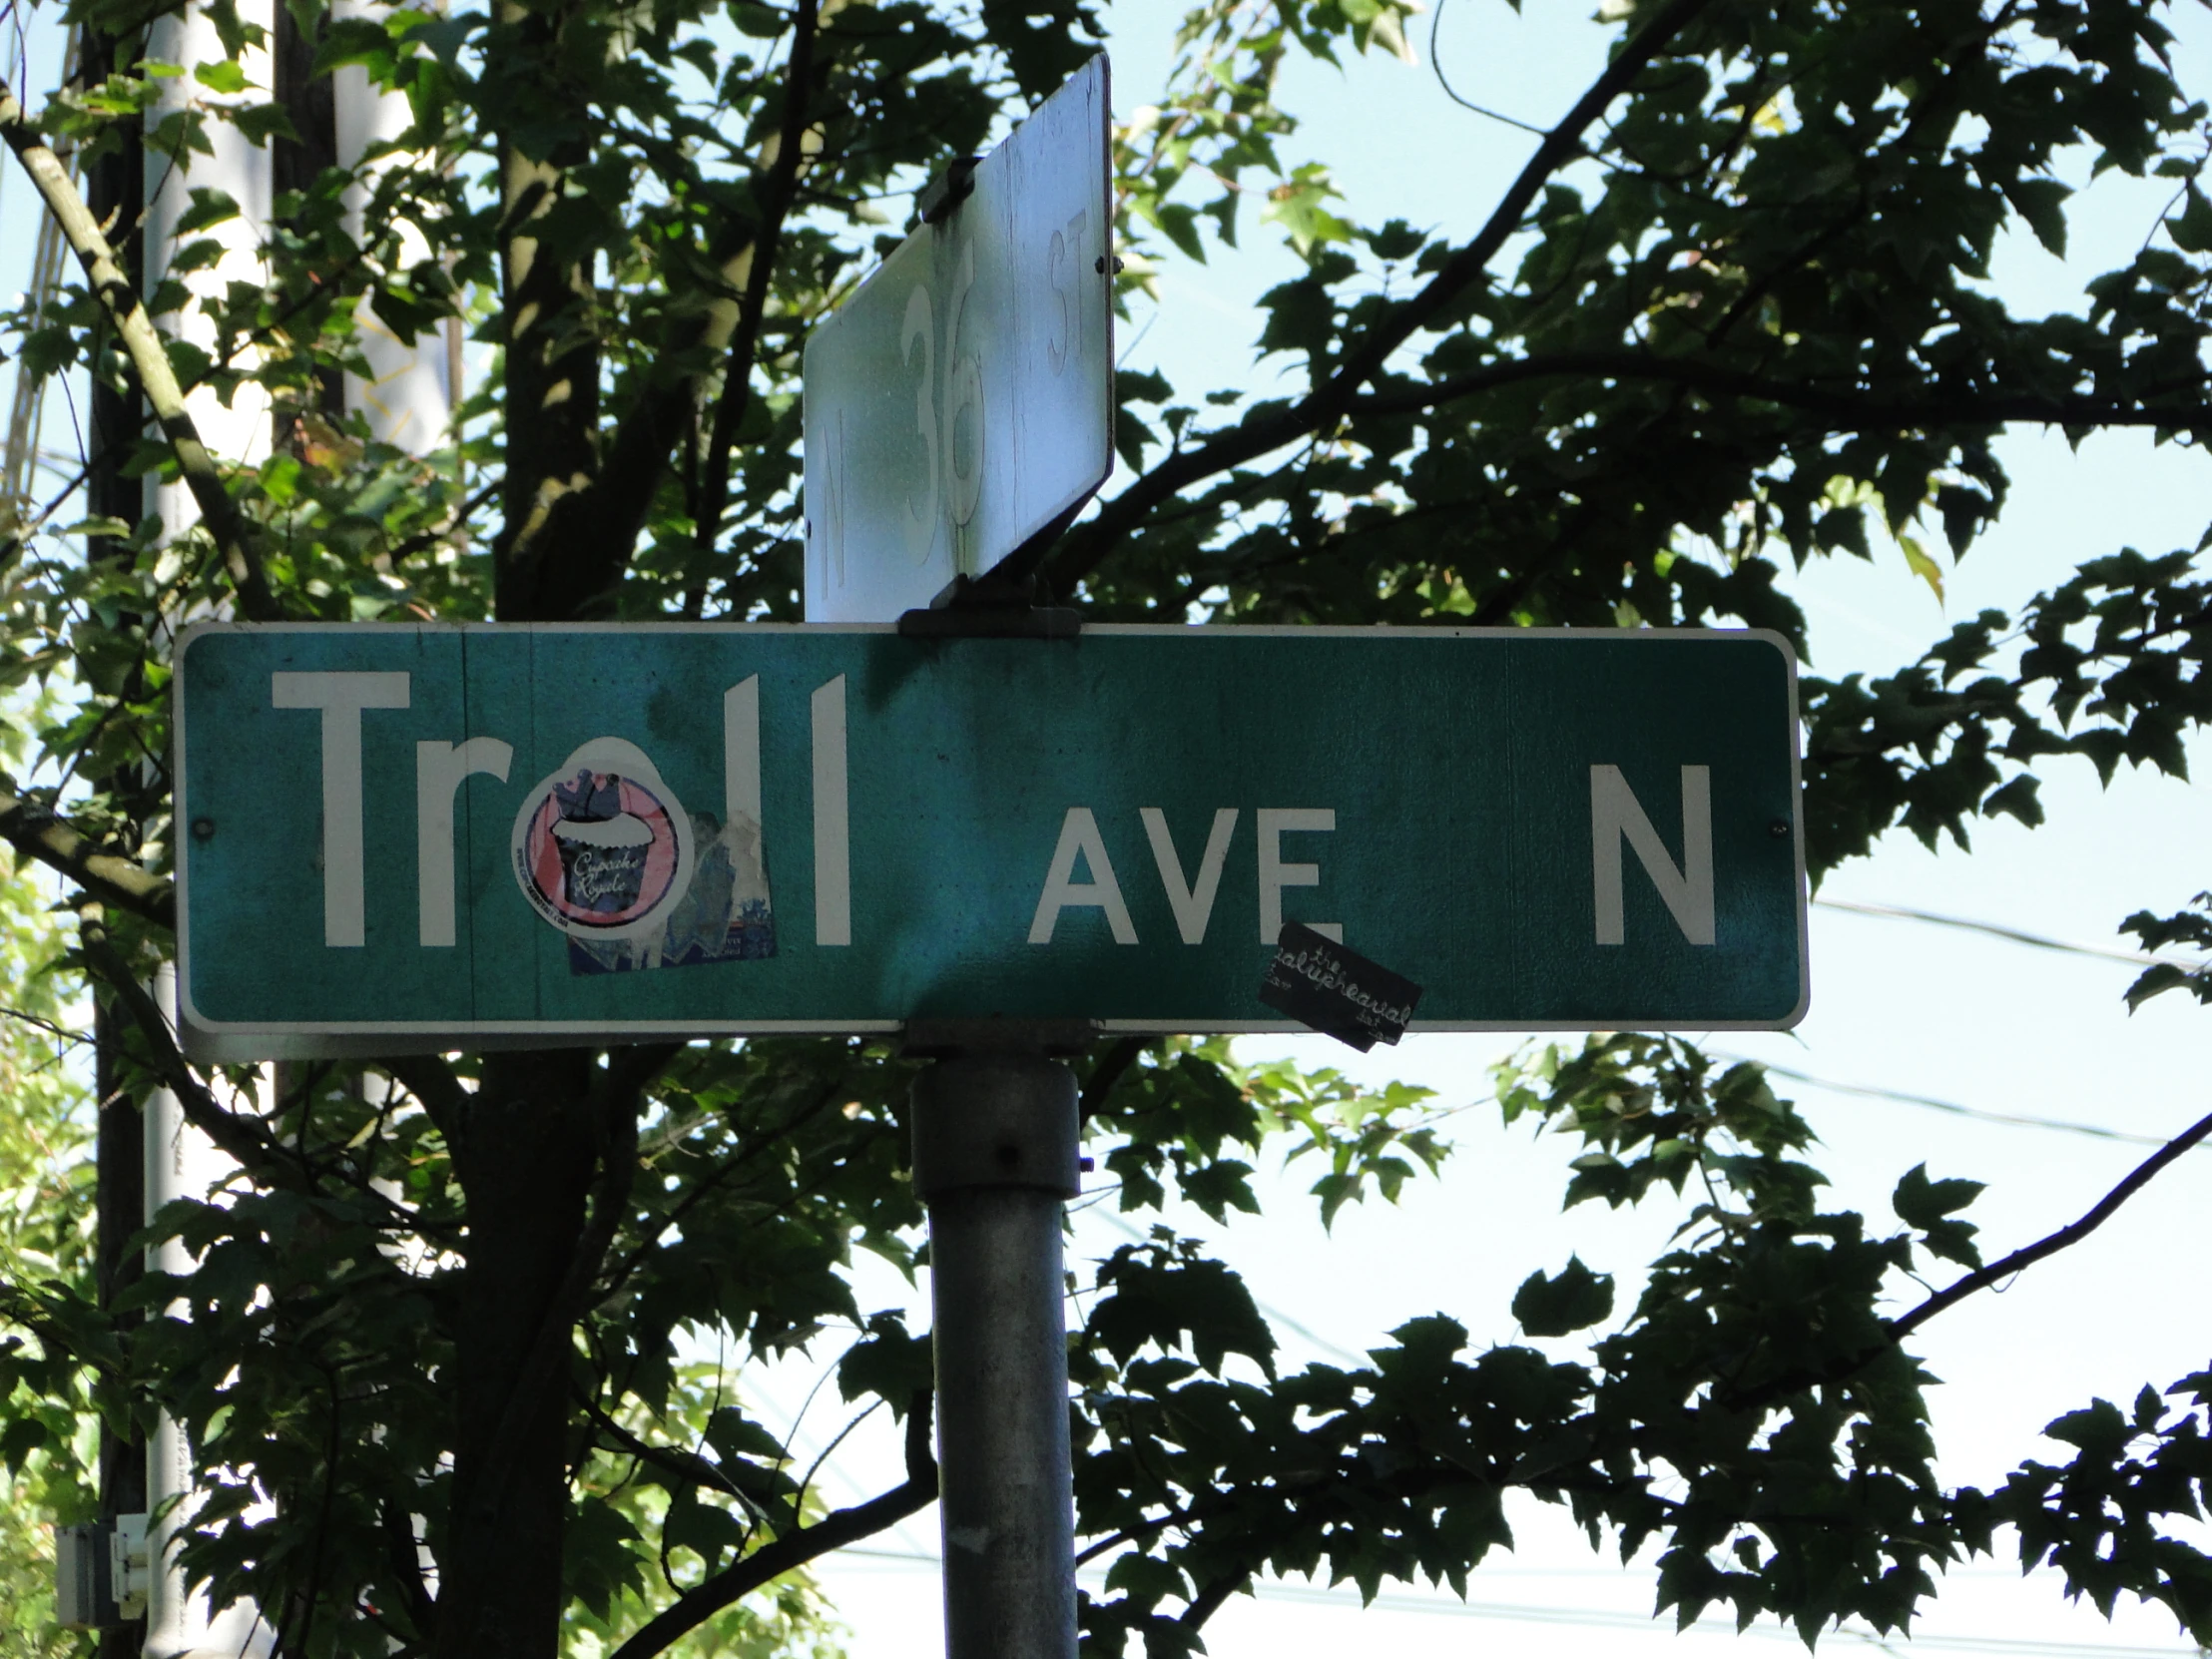 street sign with tree in background in urban area